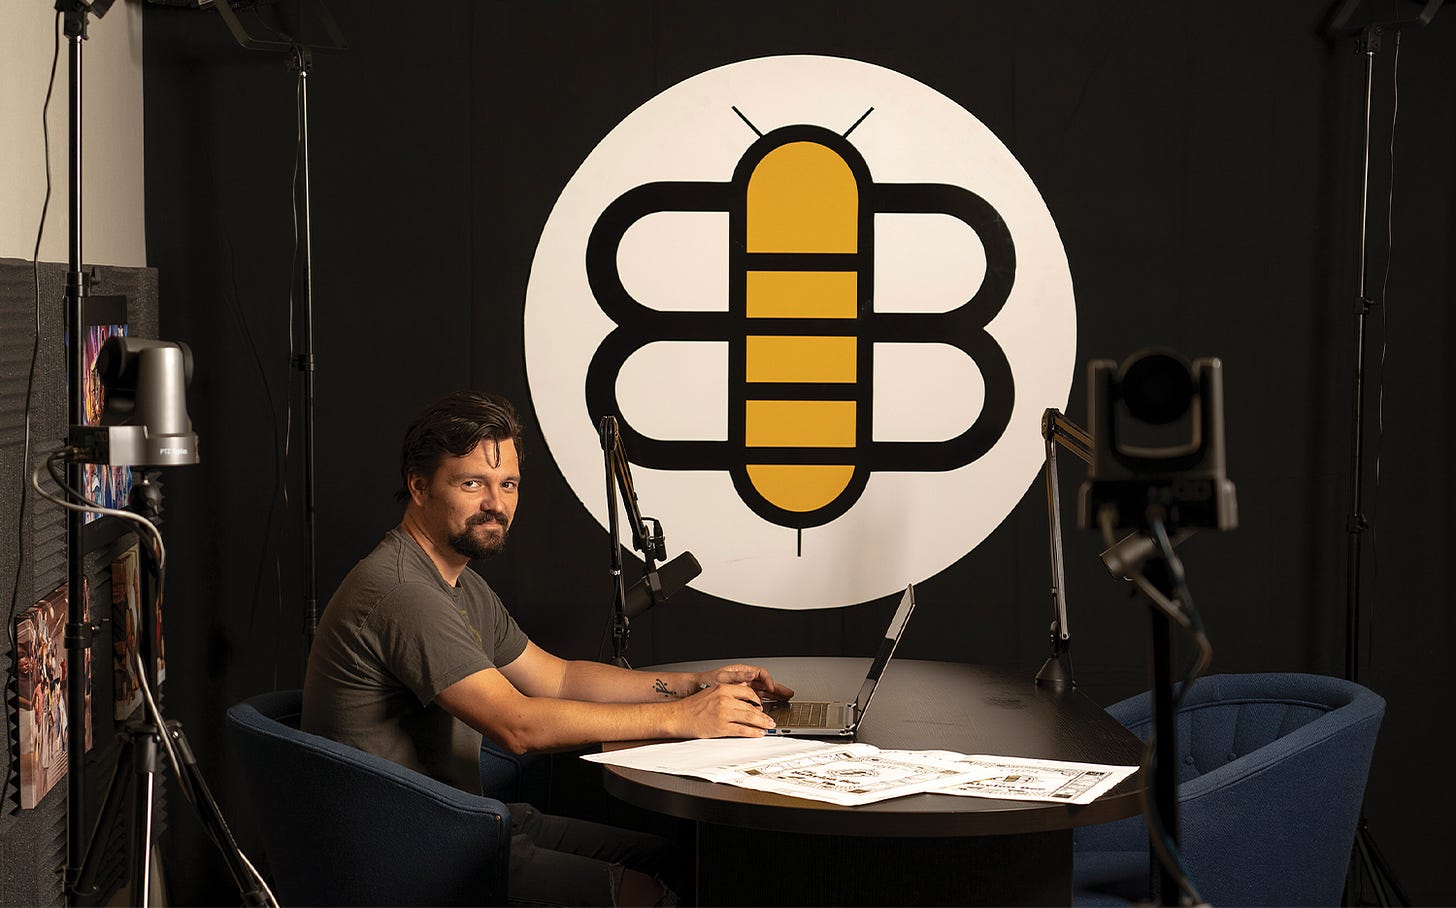 Kyle Mann, editor in chief of the Babylon Bee, at the website’s office in Upland, Calif.